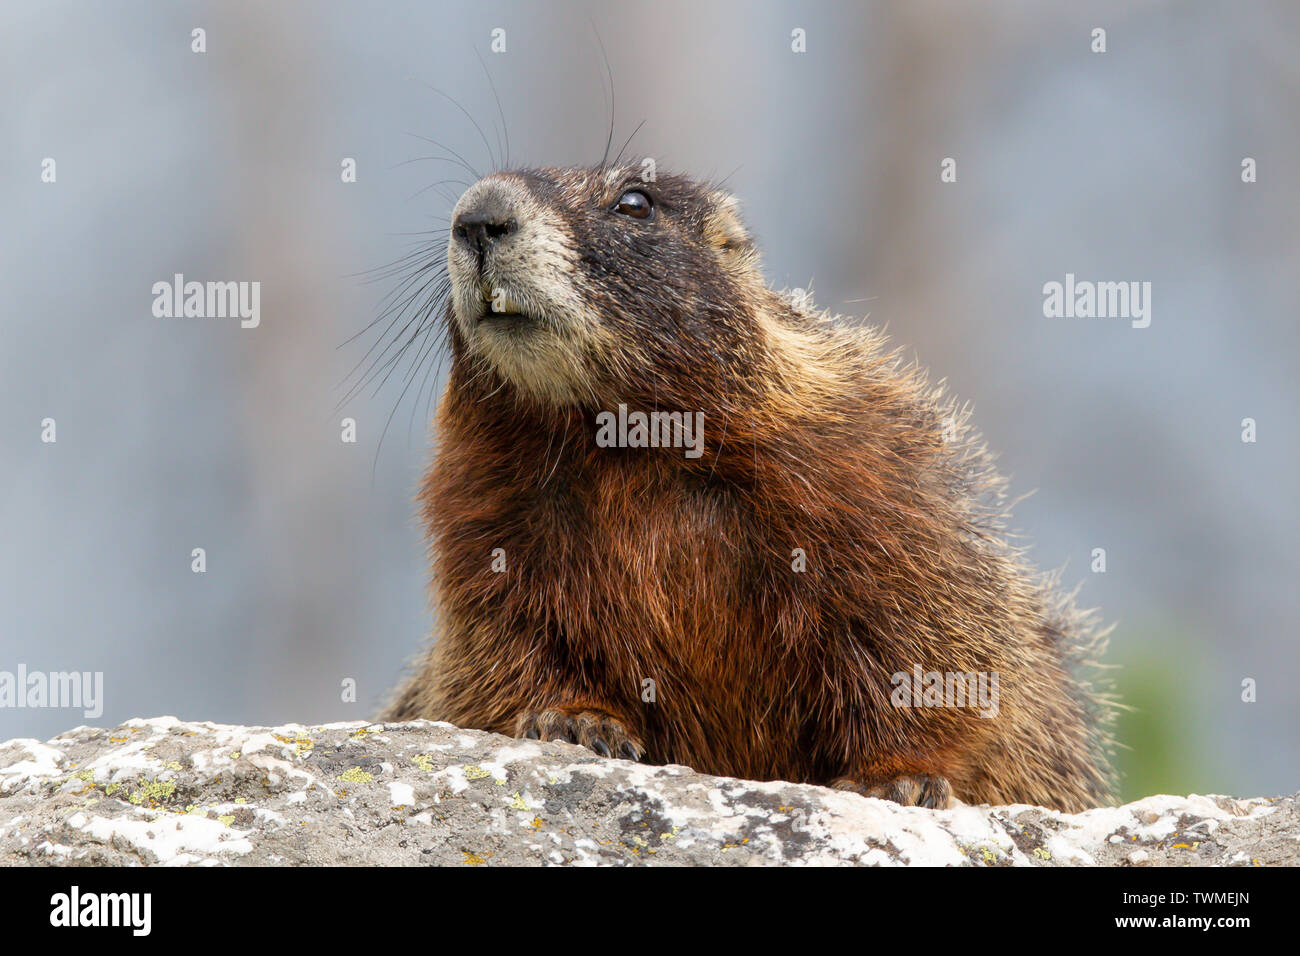 A yellow-bellied marmot  (Marmota flaviventris) watches hikers on the Jenny Lake Trail in Grand Tetons National Park, Wyoming, USA. Stock Photo